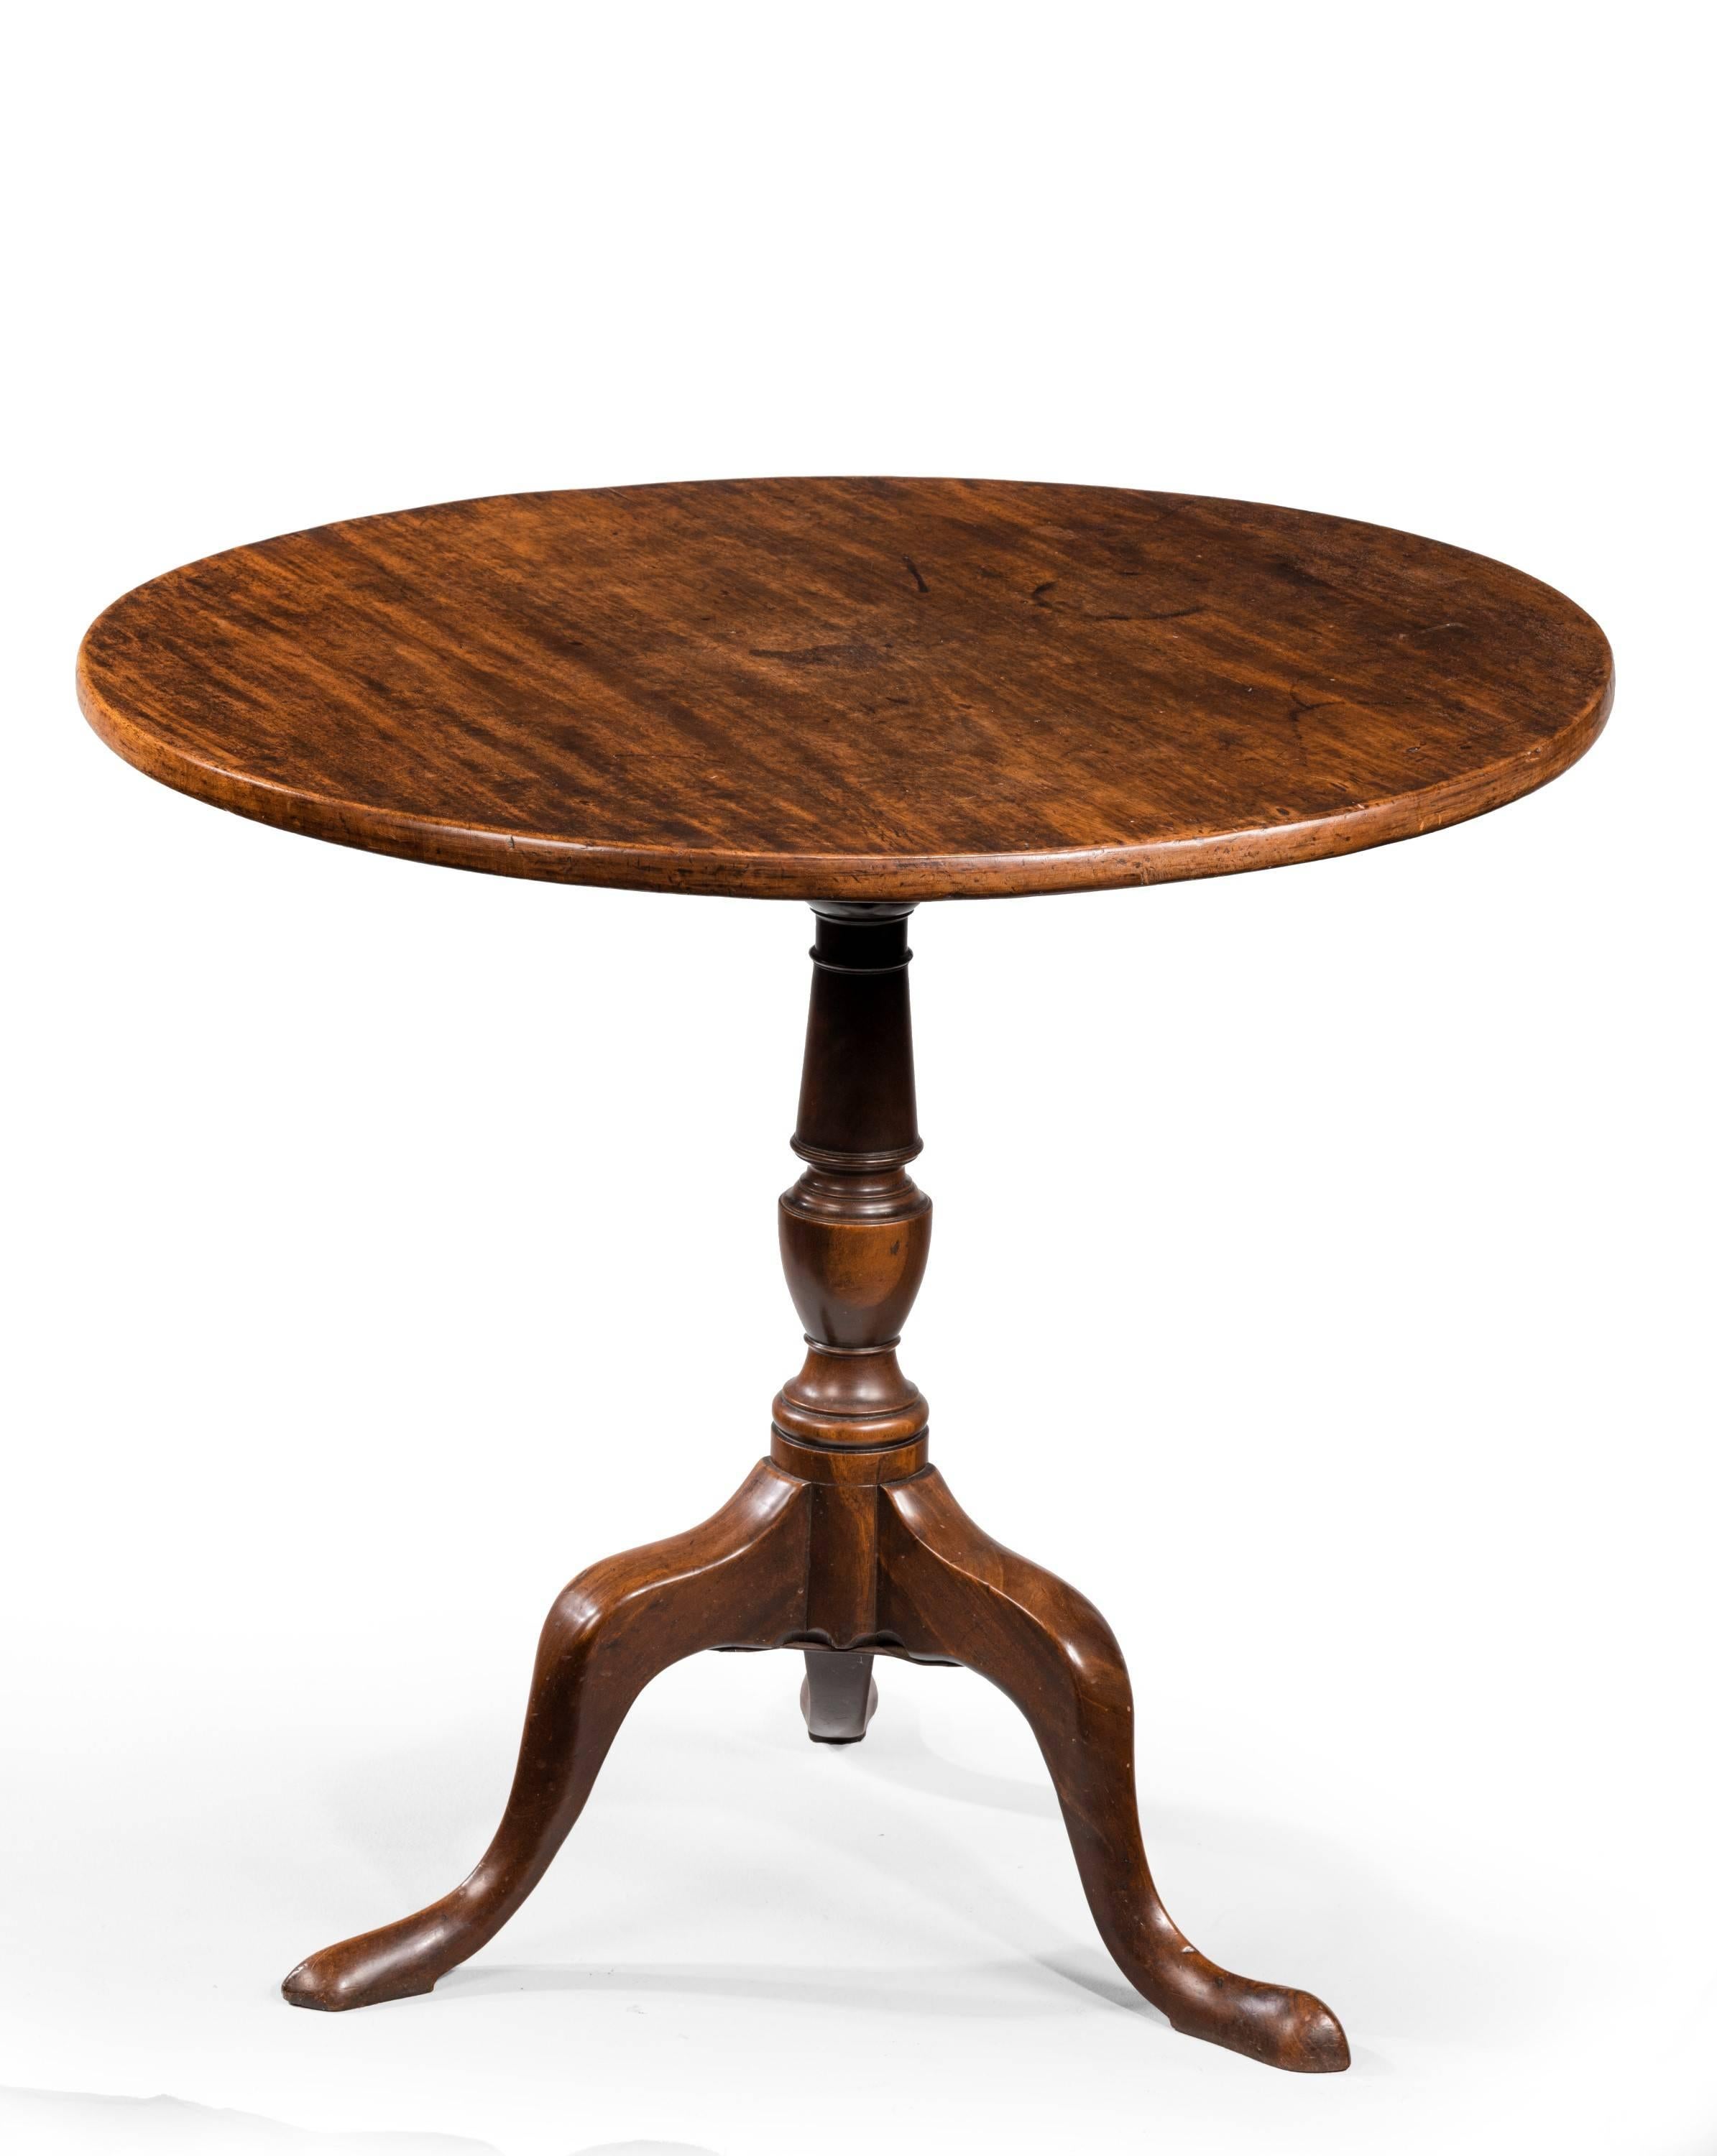 A good late 18th century mahogany tilt table on a well turned supports. Cabriole legs. Excellent overall color and patina.